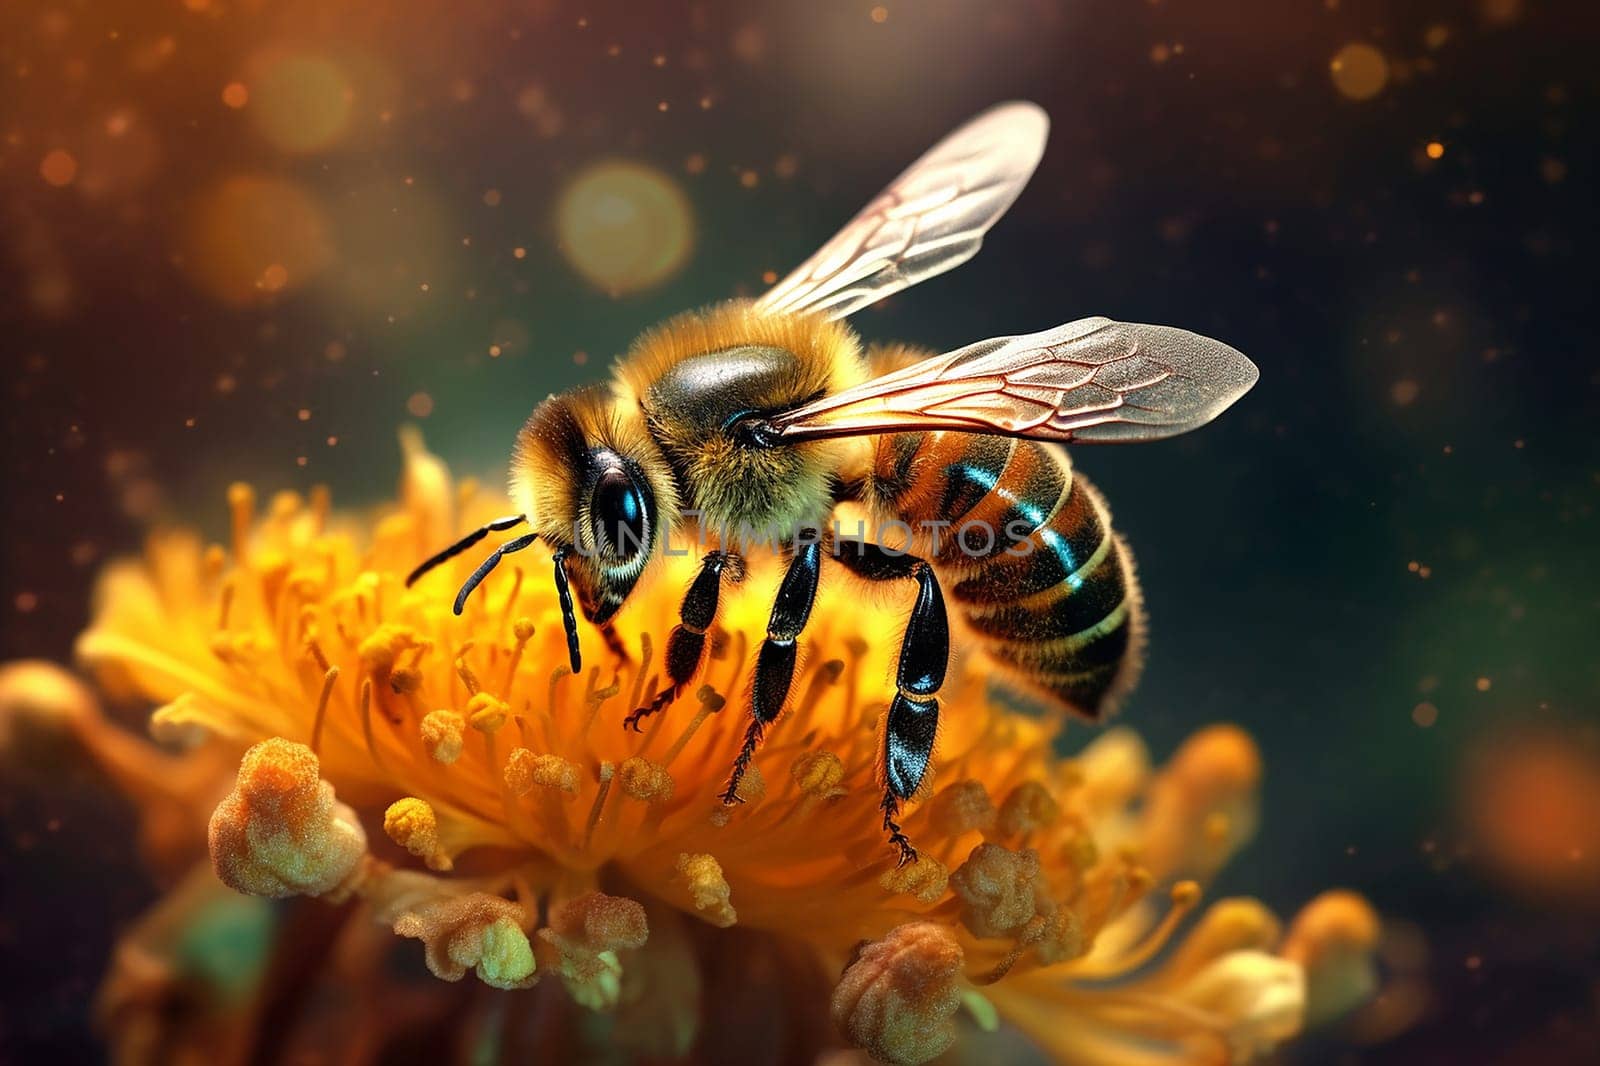 A bee in the process of pollinating a flower, sunlight, natural lighting by Hype2art